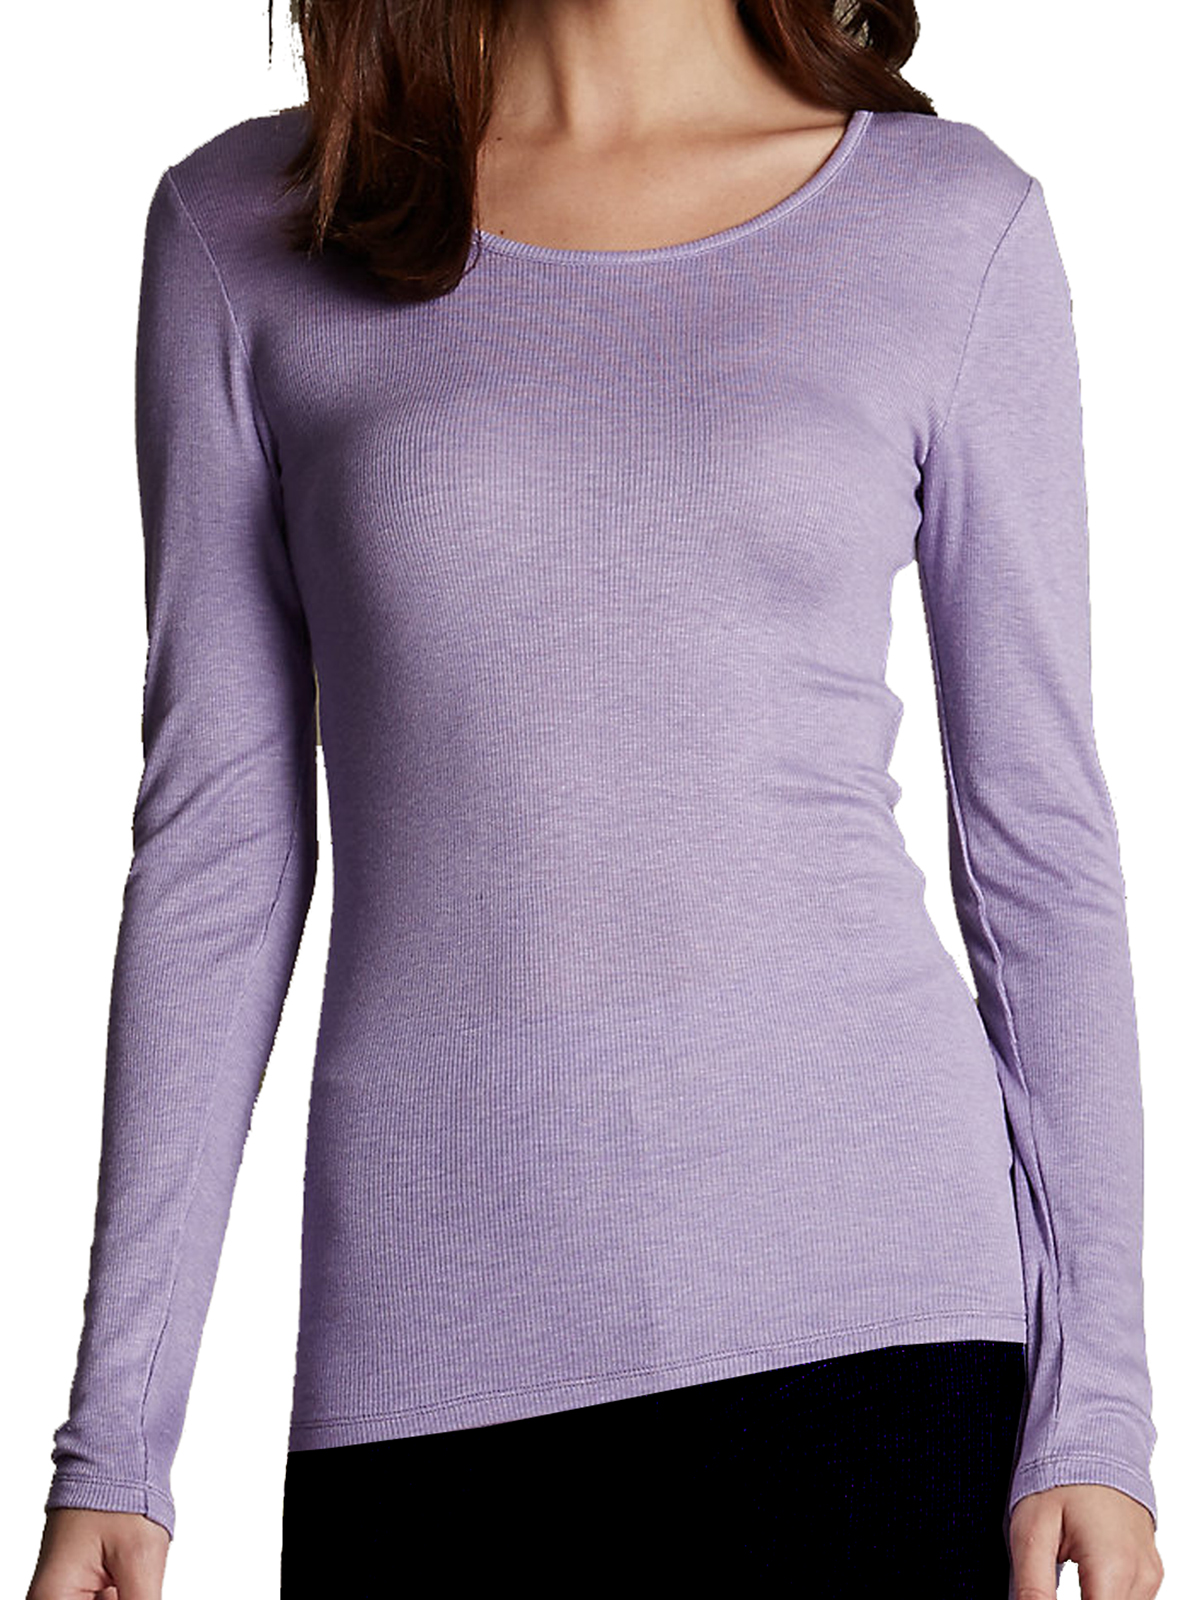 Marks and Spencer - - M&5 LILAC Heatgen Long Sleeve Ribbed Thermal Top ...